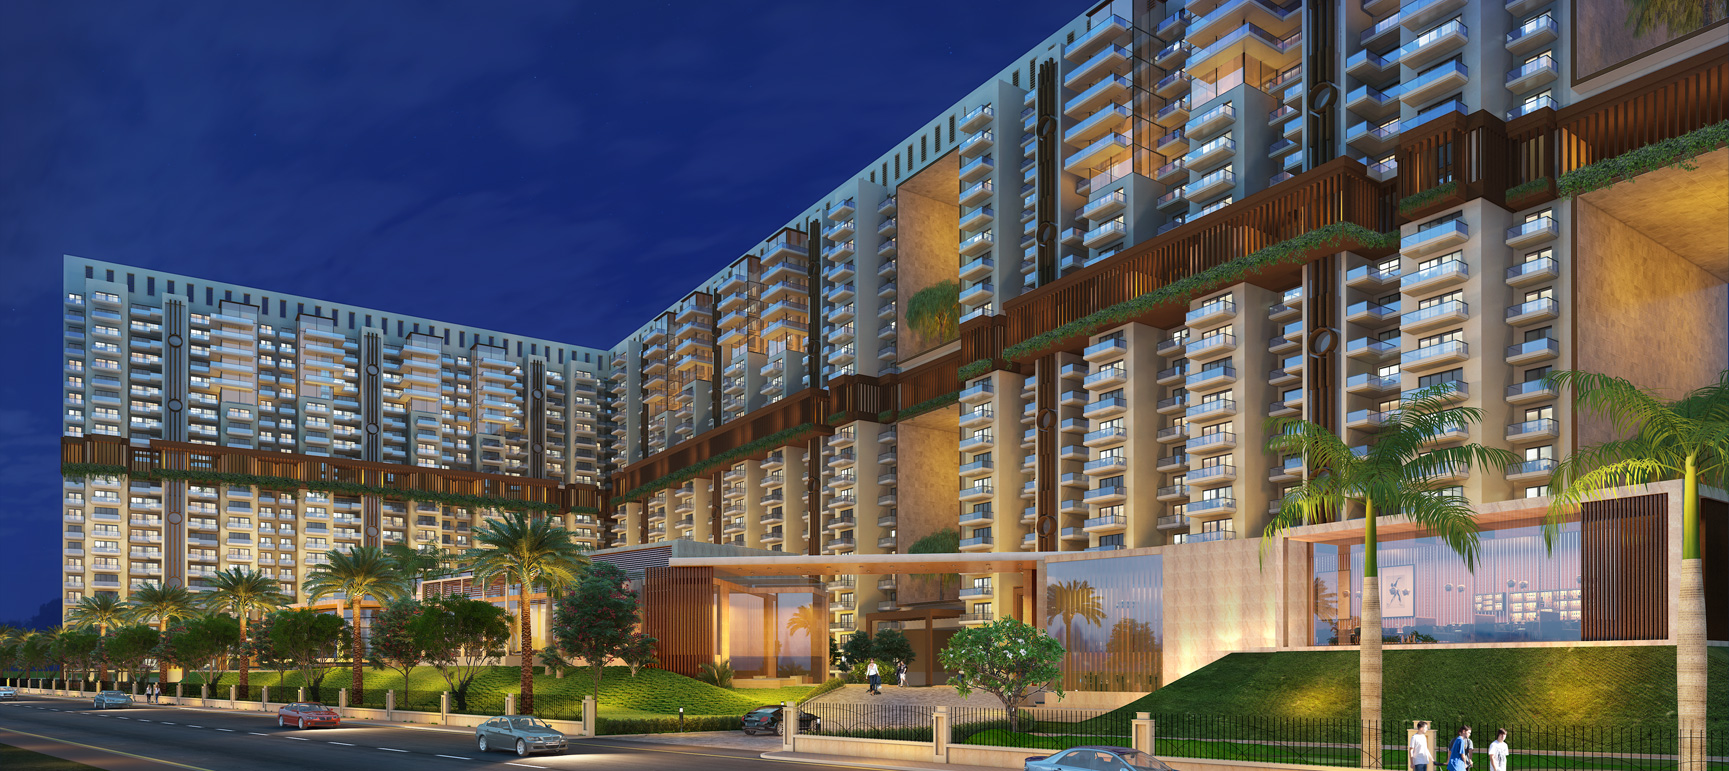 3 4 5 BHK ultra luxurious apartments penthouses in mohali